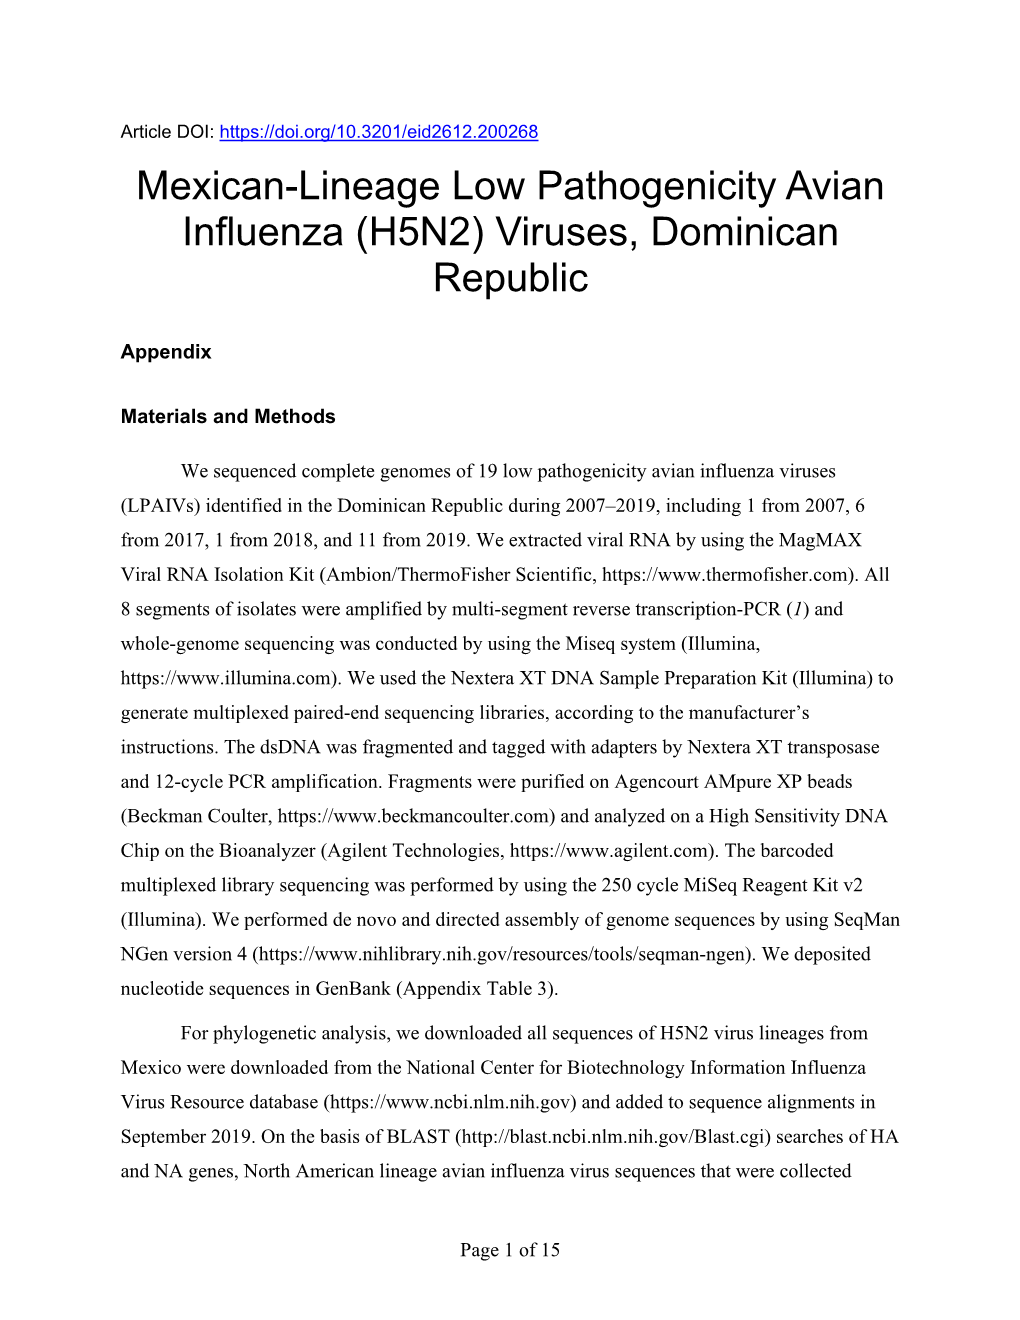 Mexican-Lineage Low Pathogenicity Avian Influenza (H5N2) Viruses, Dominican Republic